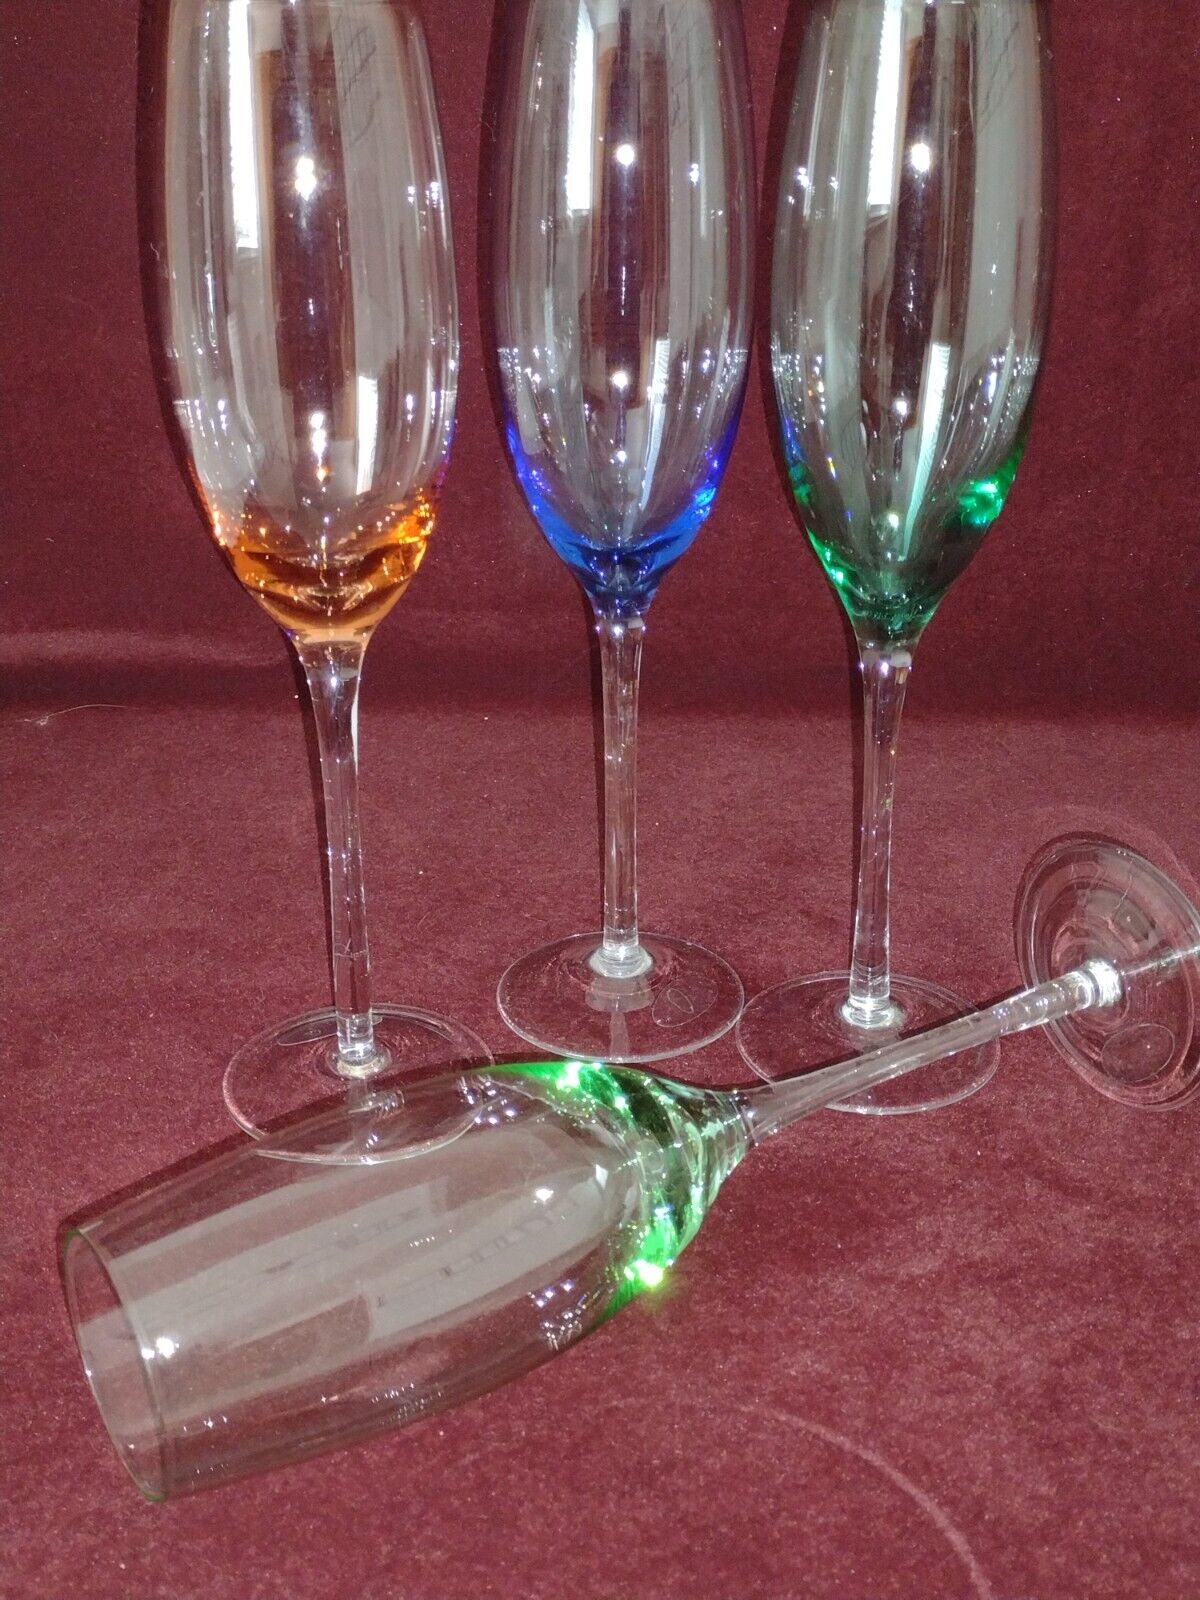 Spectrum (?) Hand Blown Crystal Champaign Flutes, Wine Glasses - Stunning